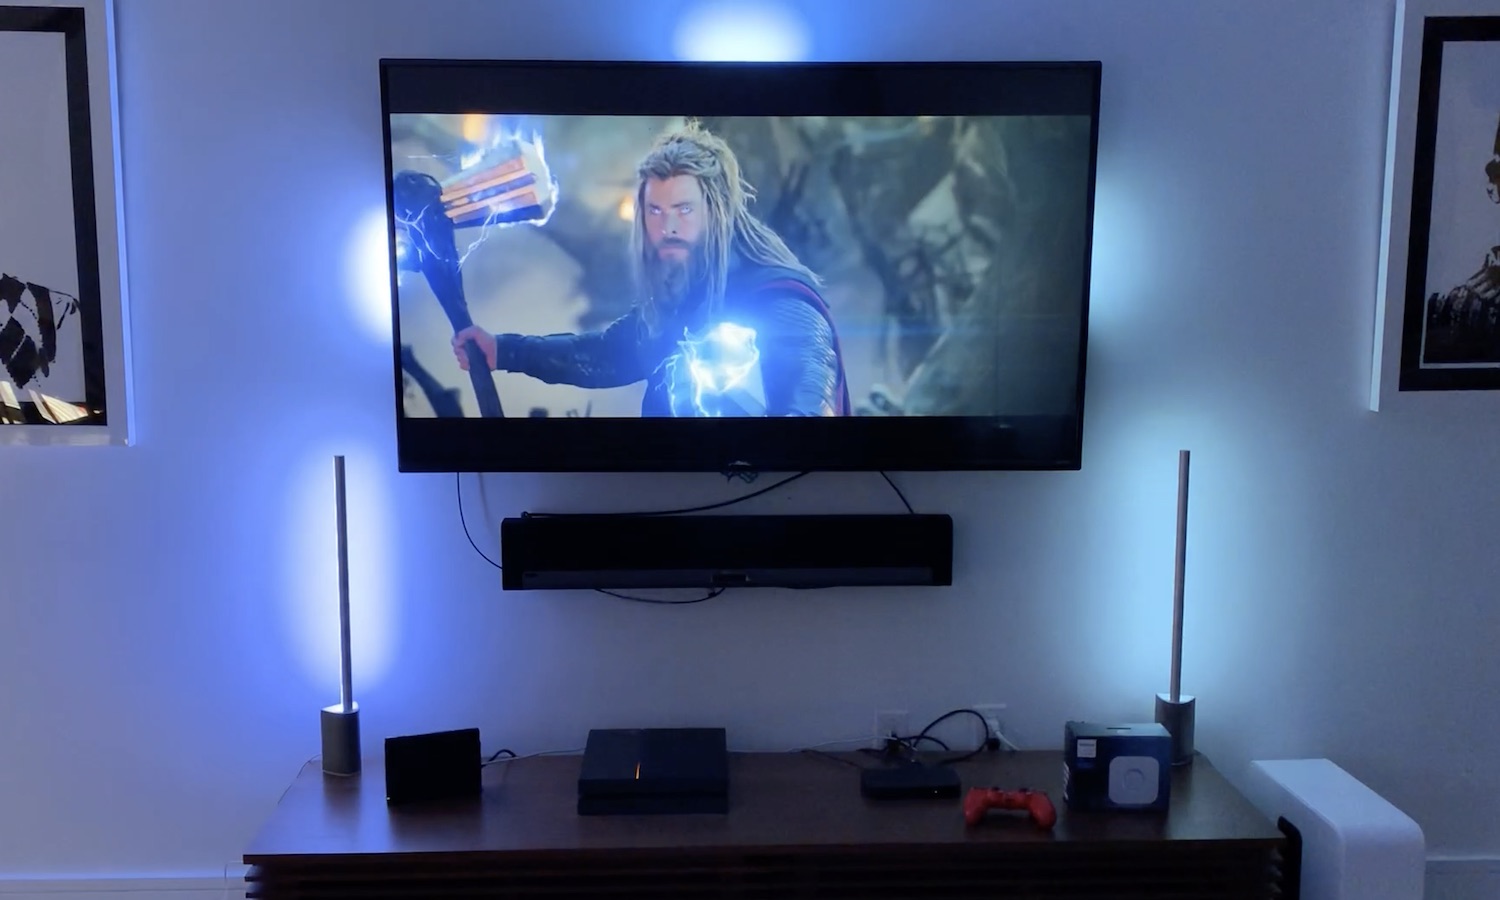 Philips Hue Play HDMI Sync Box review: Sync your lights, most of the time